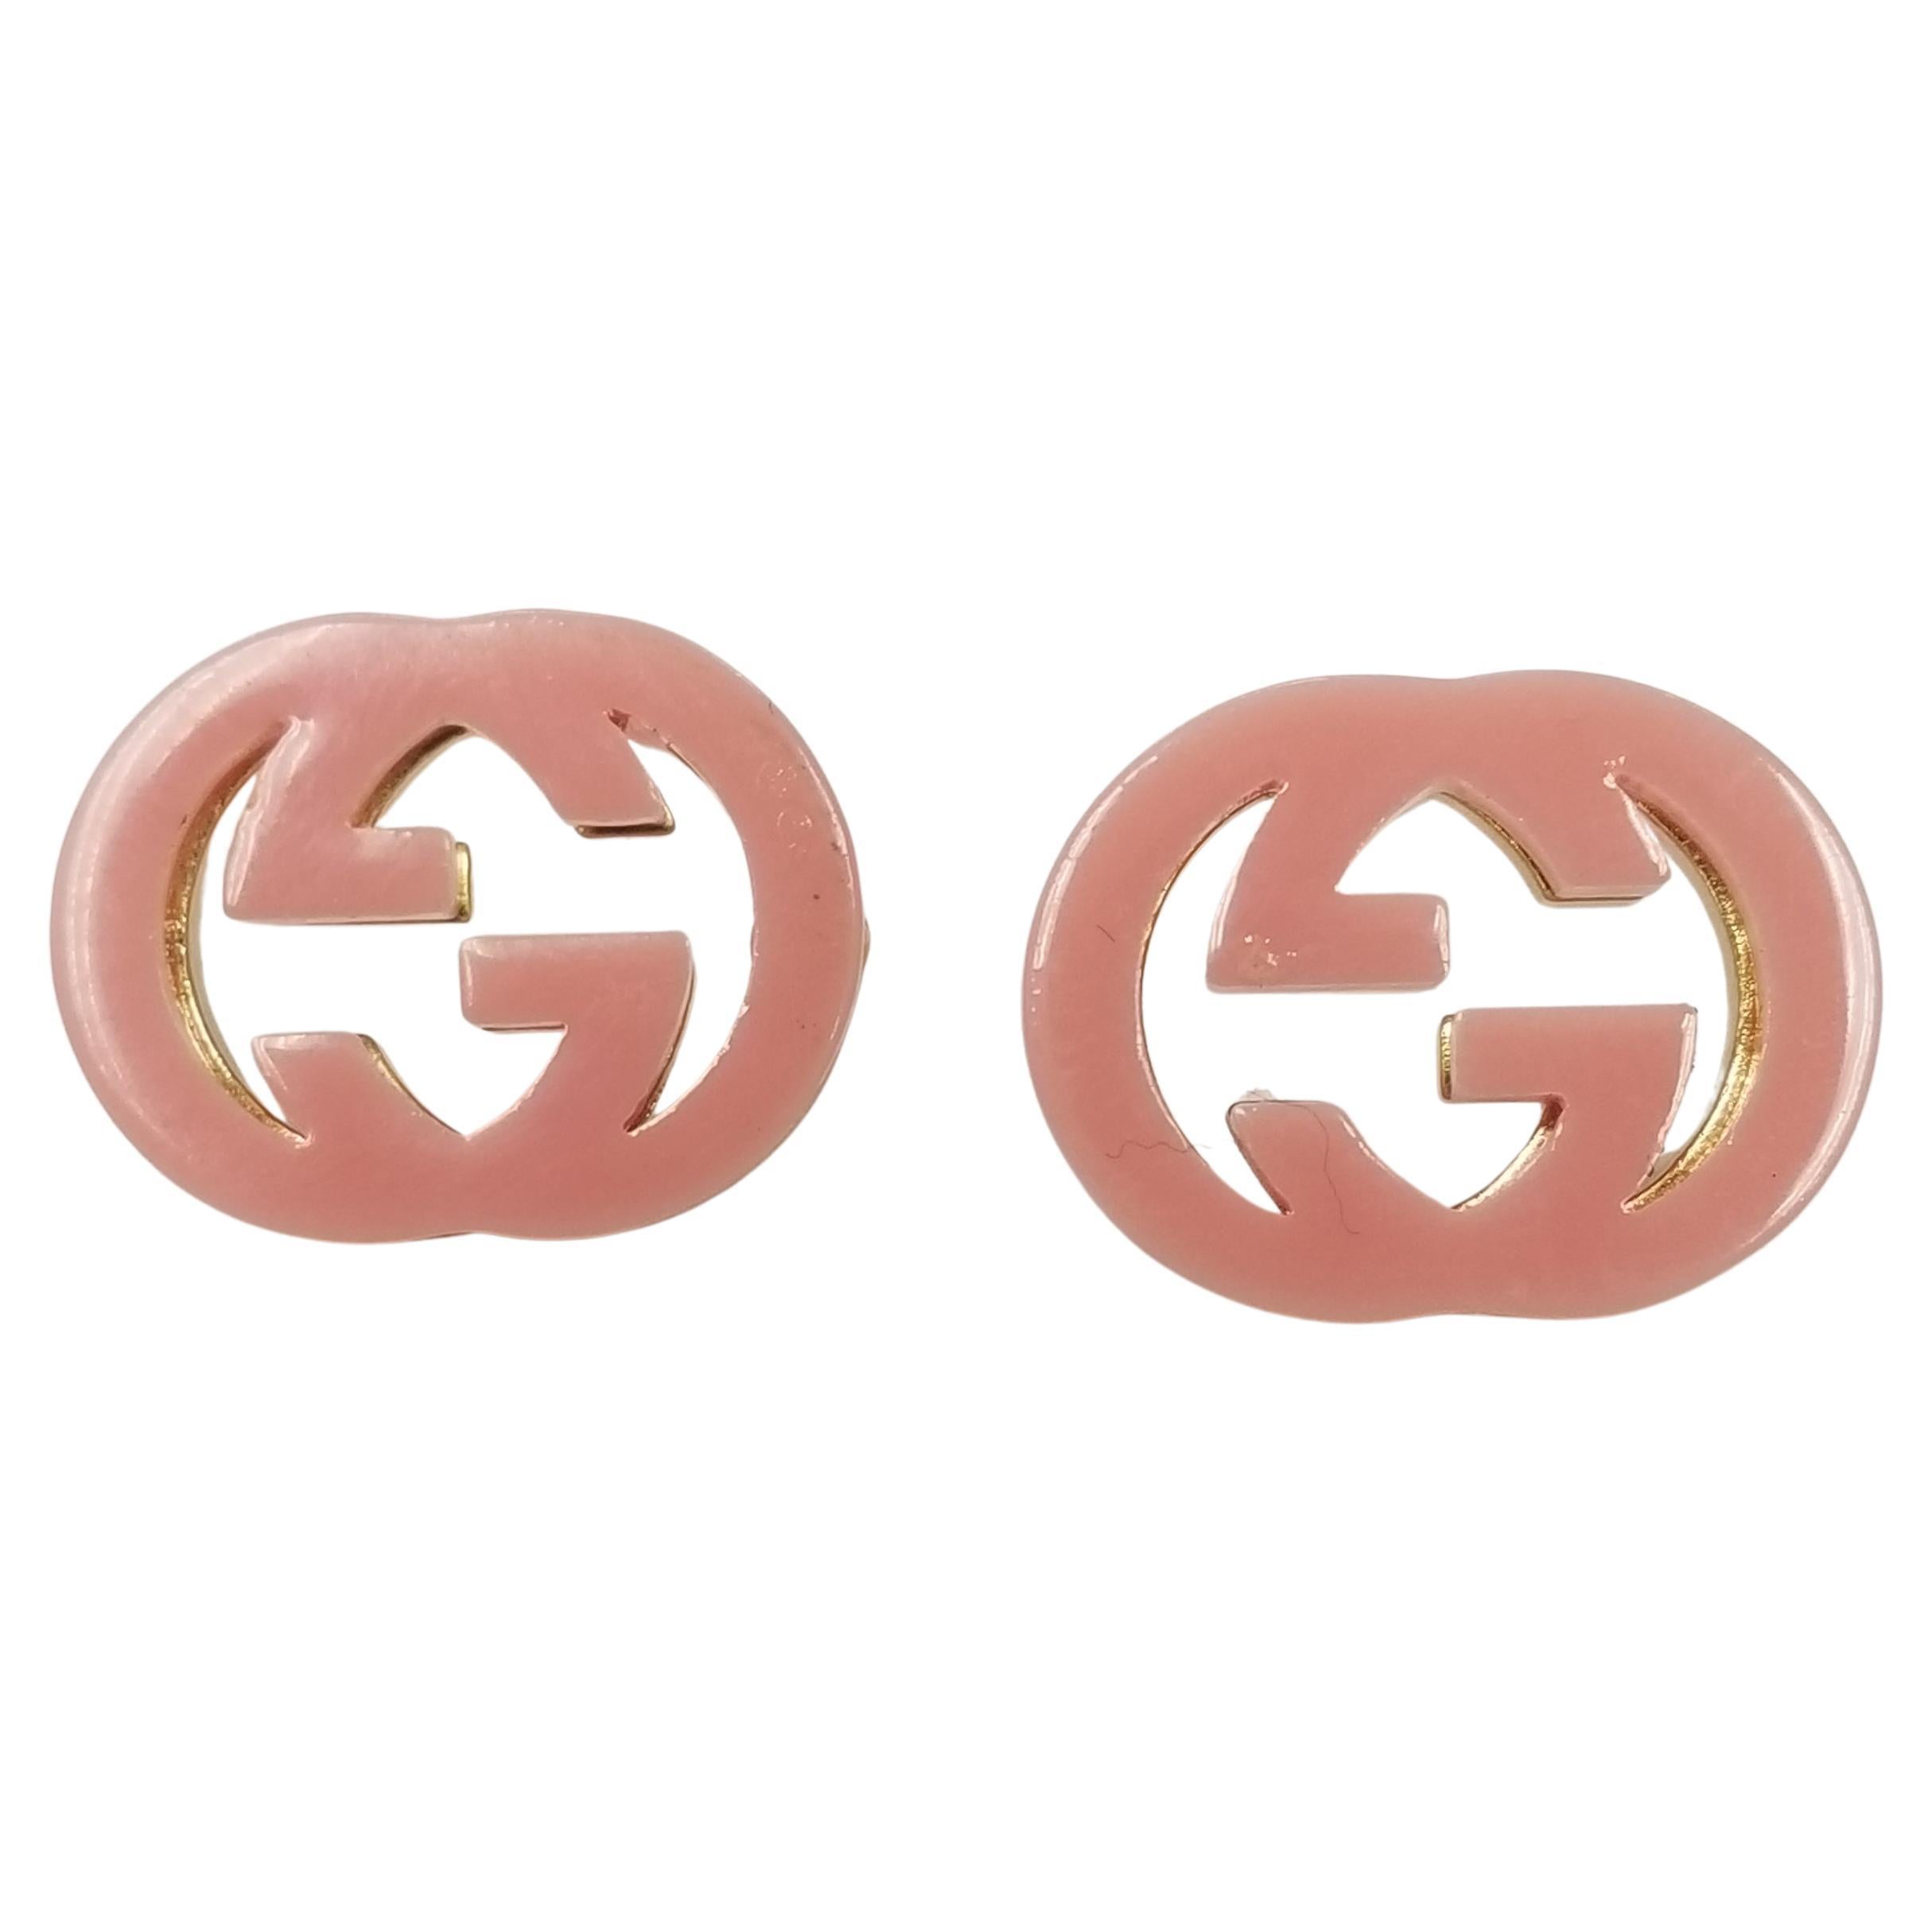 Gucci "GG" Logo Gold Plated Pink Enamel Earrings For Sale